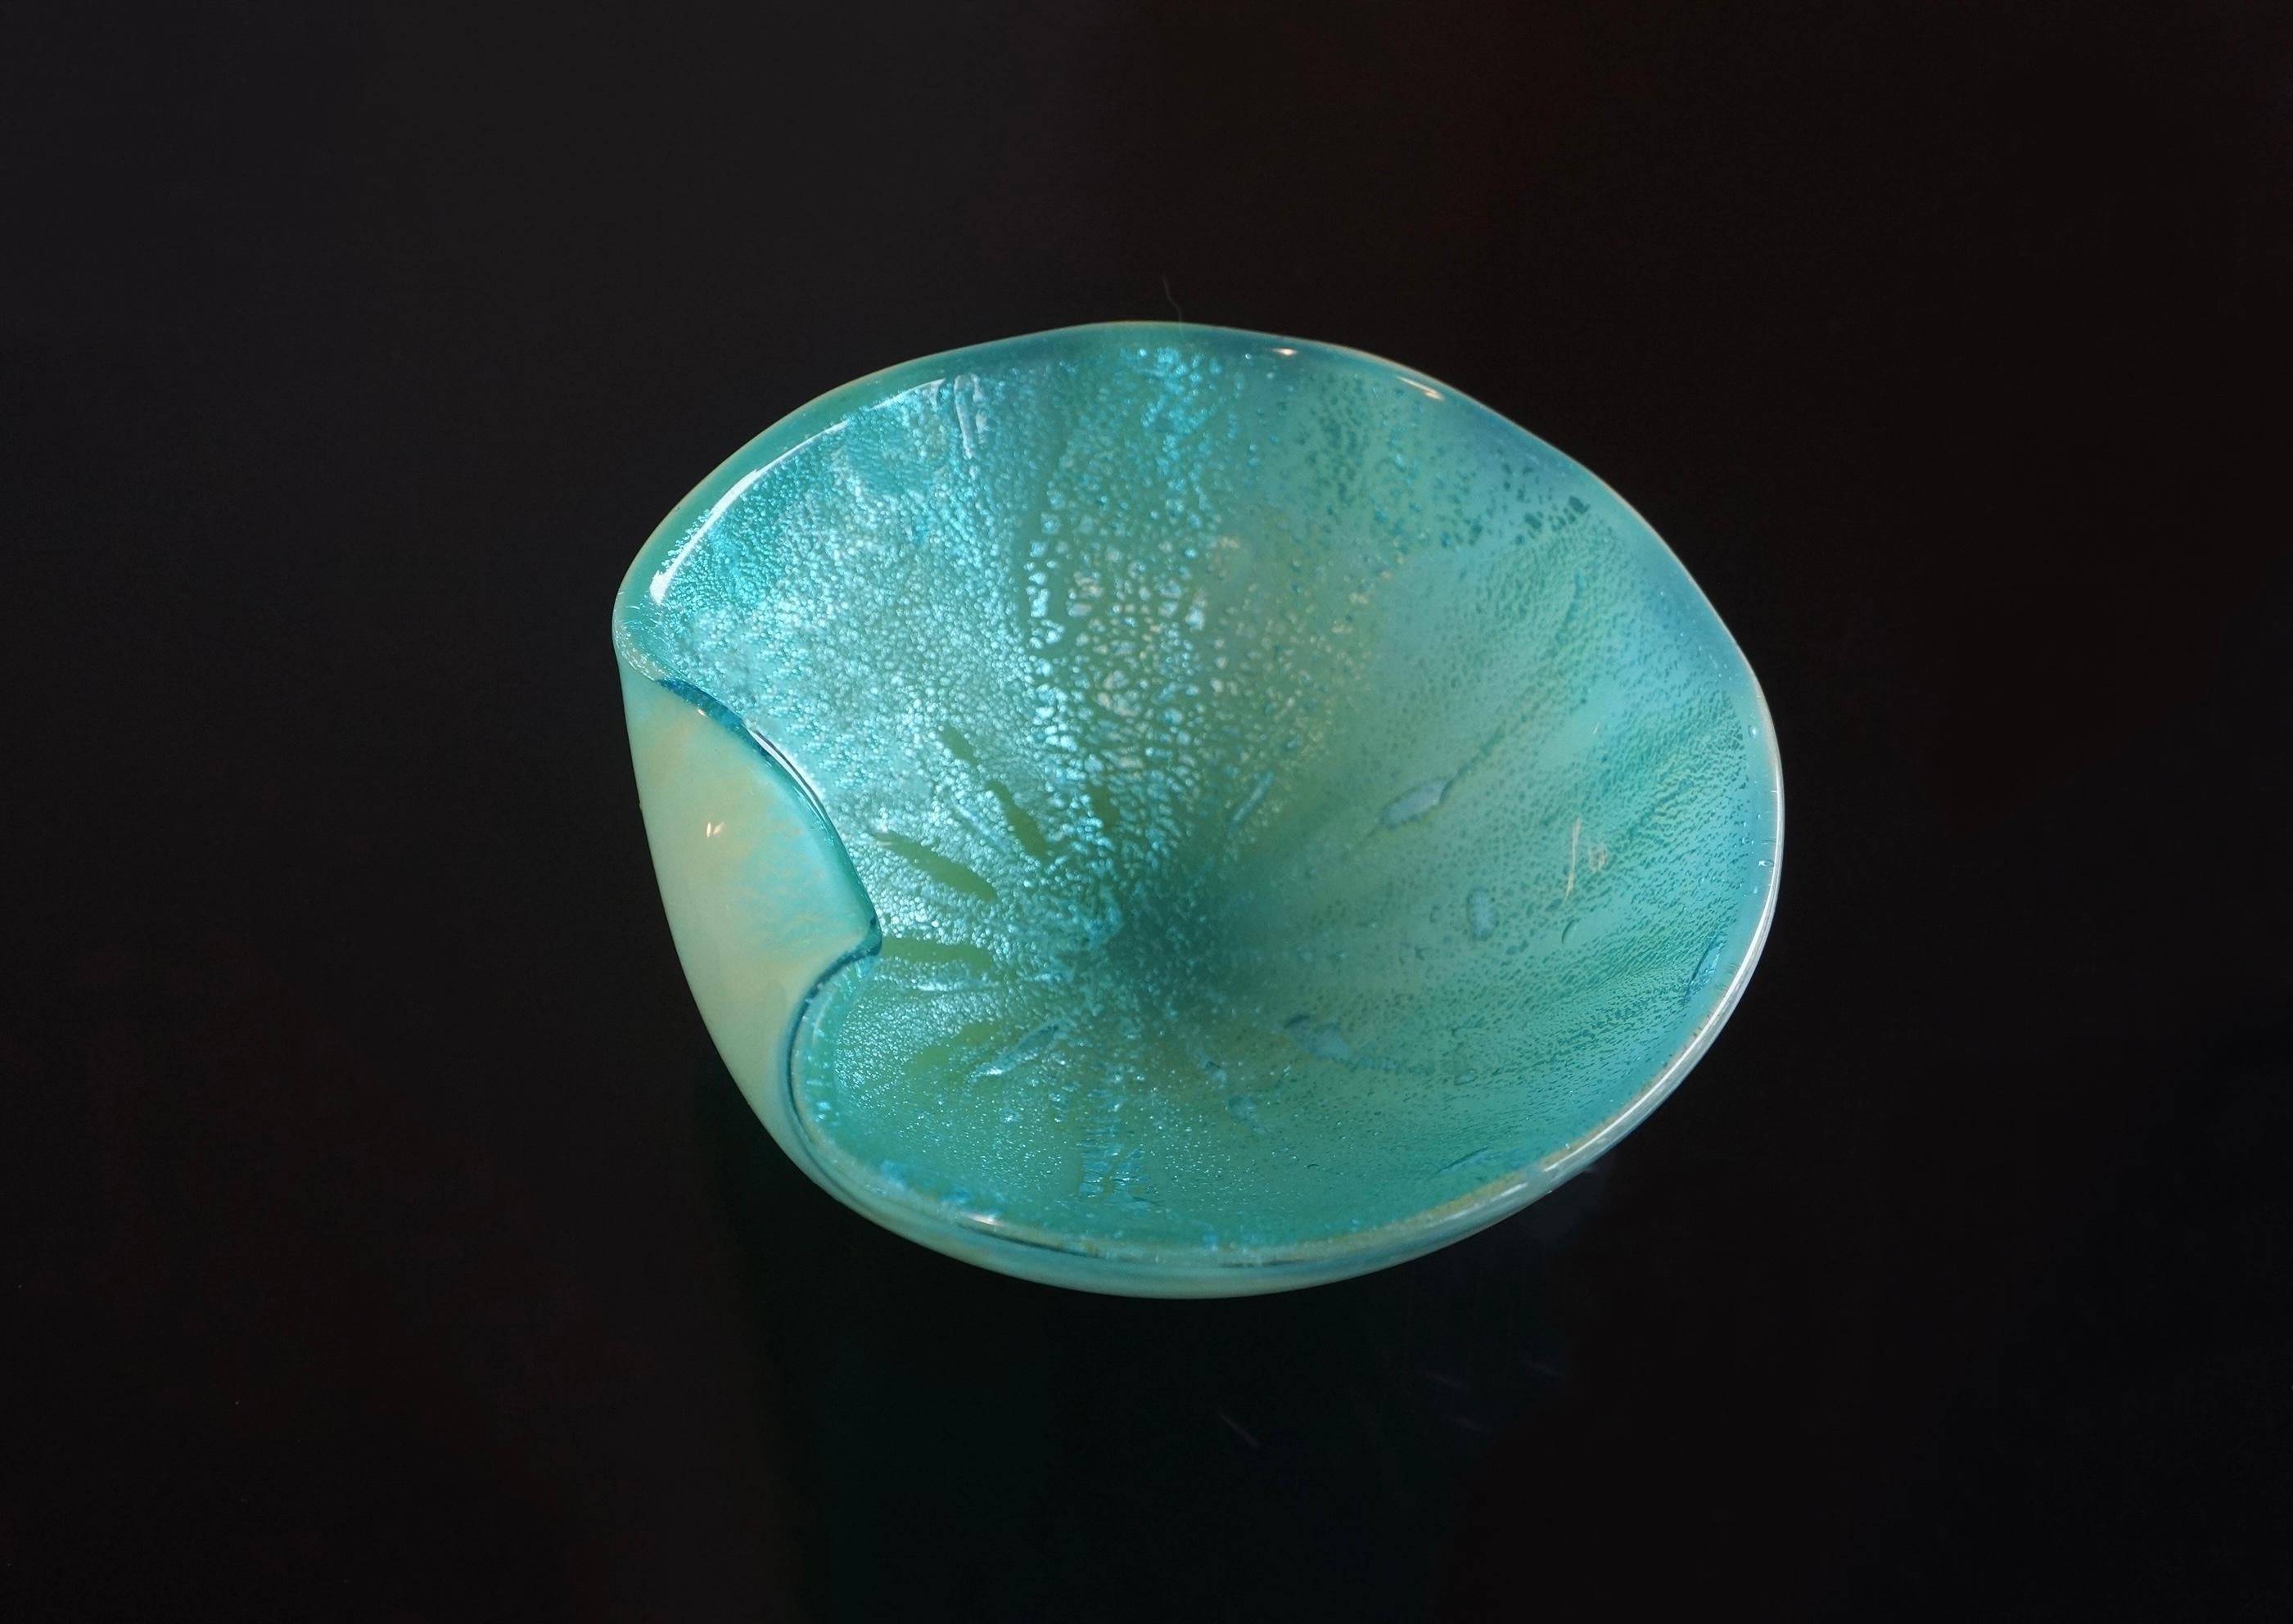 Spectacular decorative dish in blue and notes of aqua green Murano art glass, attributed to Archimede Murano. This bowl is made with blue art glass with aventurine speckles in blue tone. The outside is a blue glass colour while the inside features